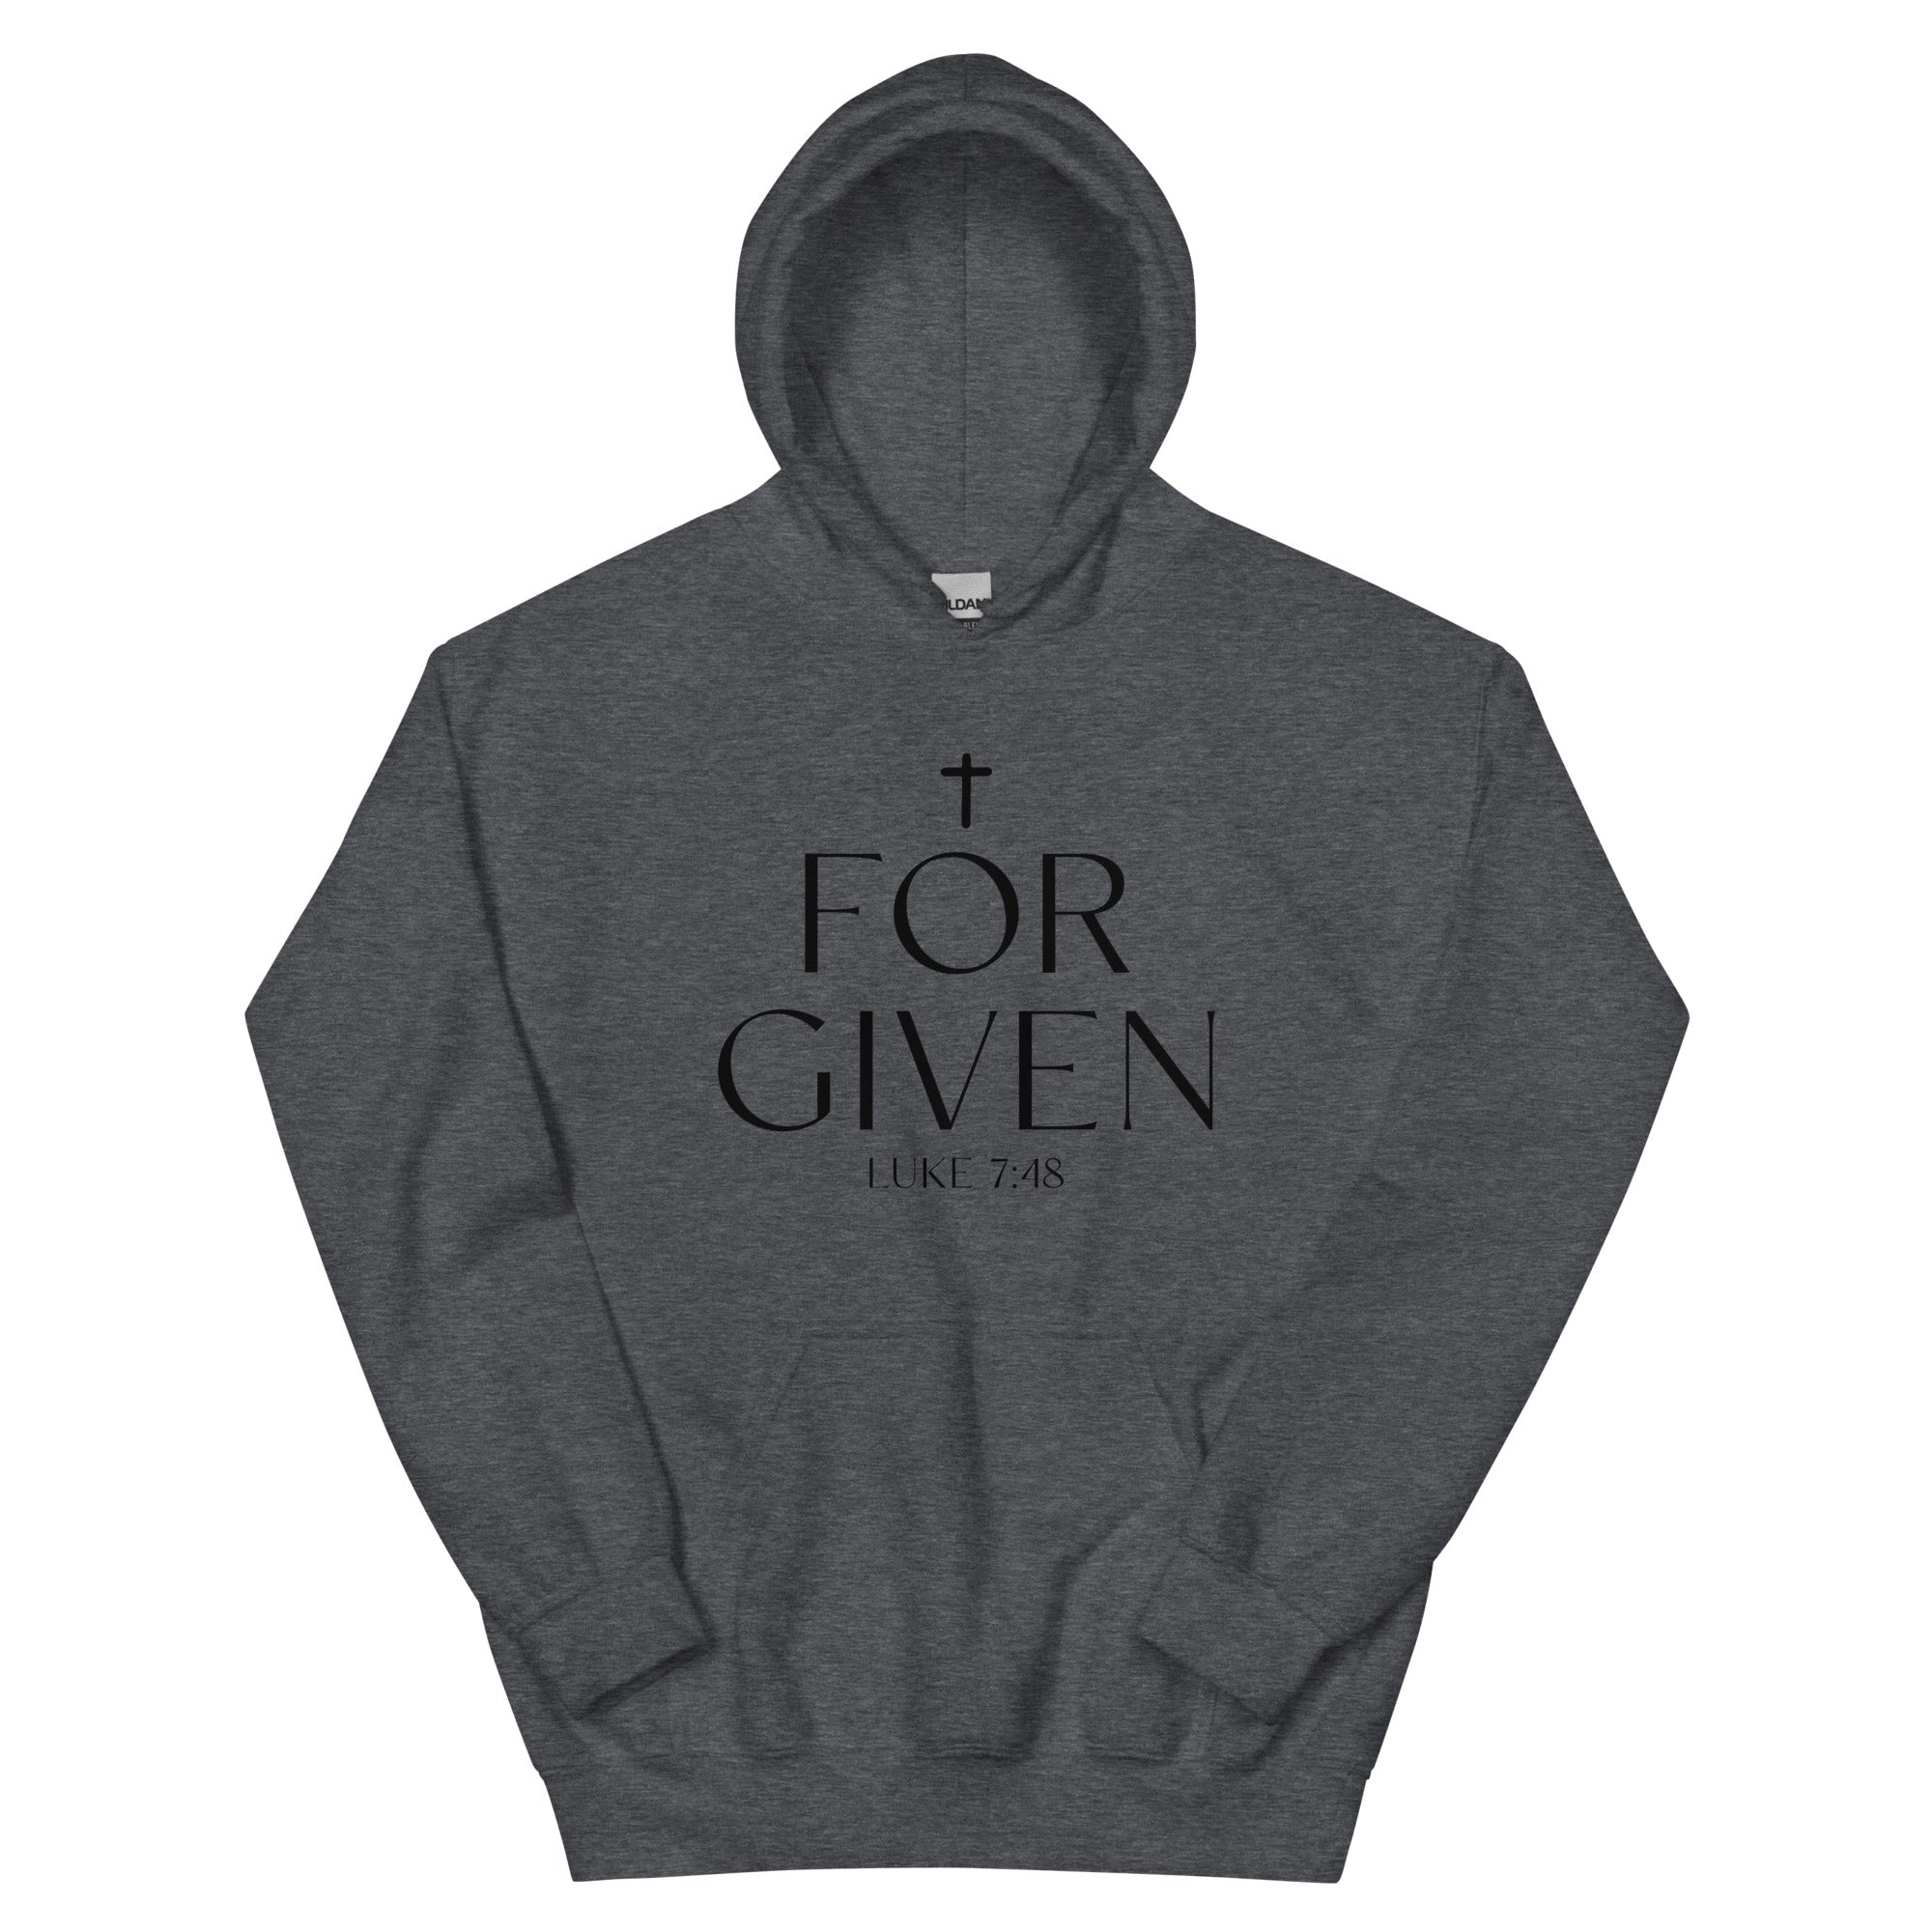 Forgiven - Unisex Hoodie